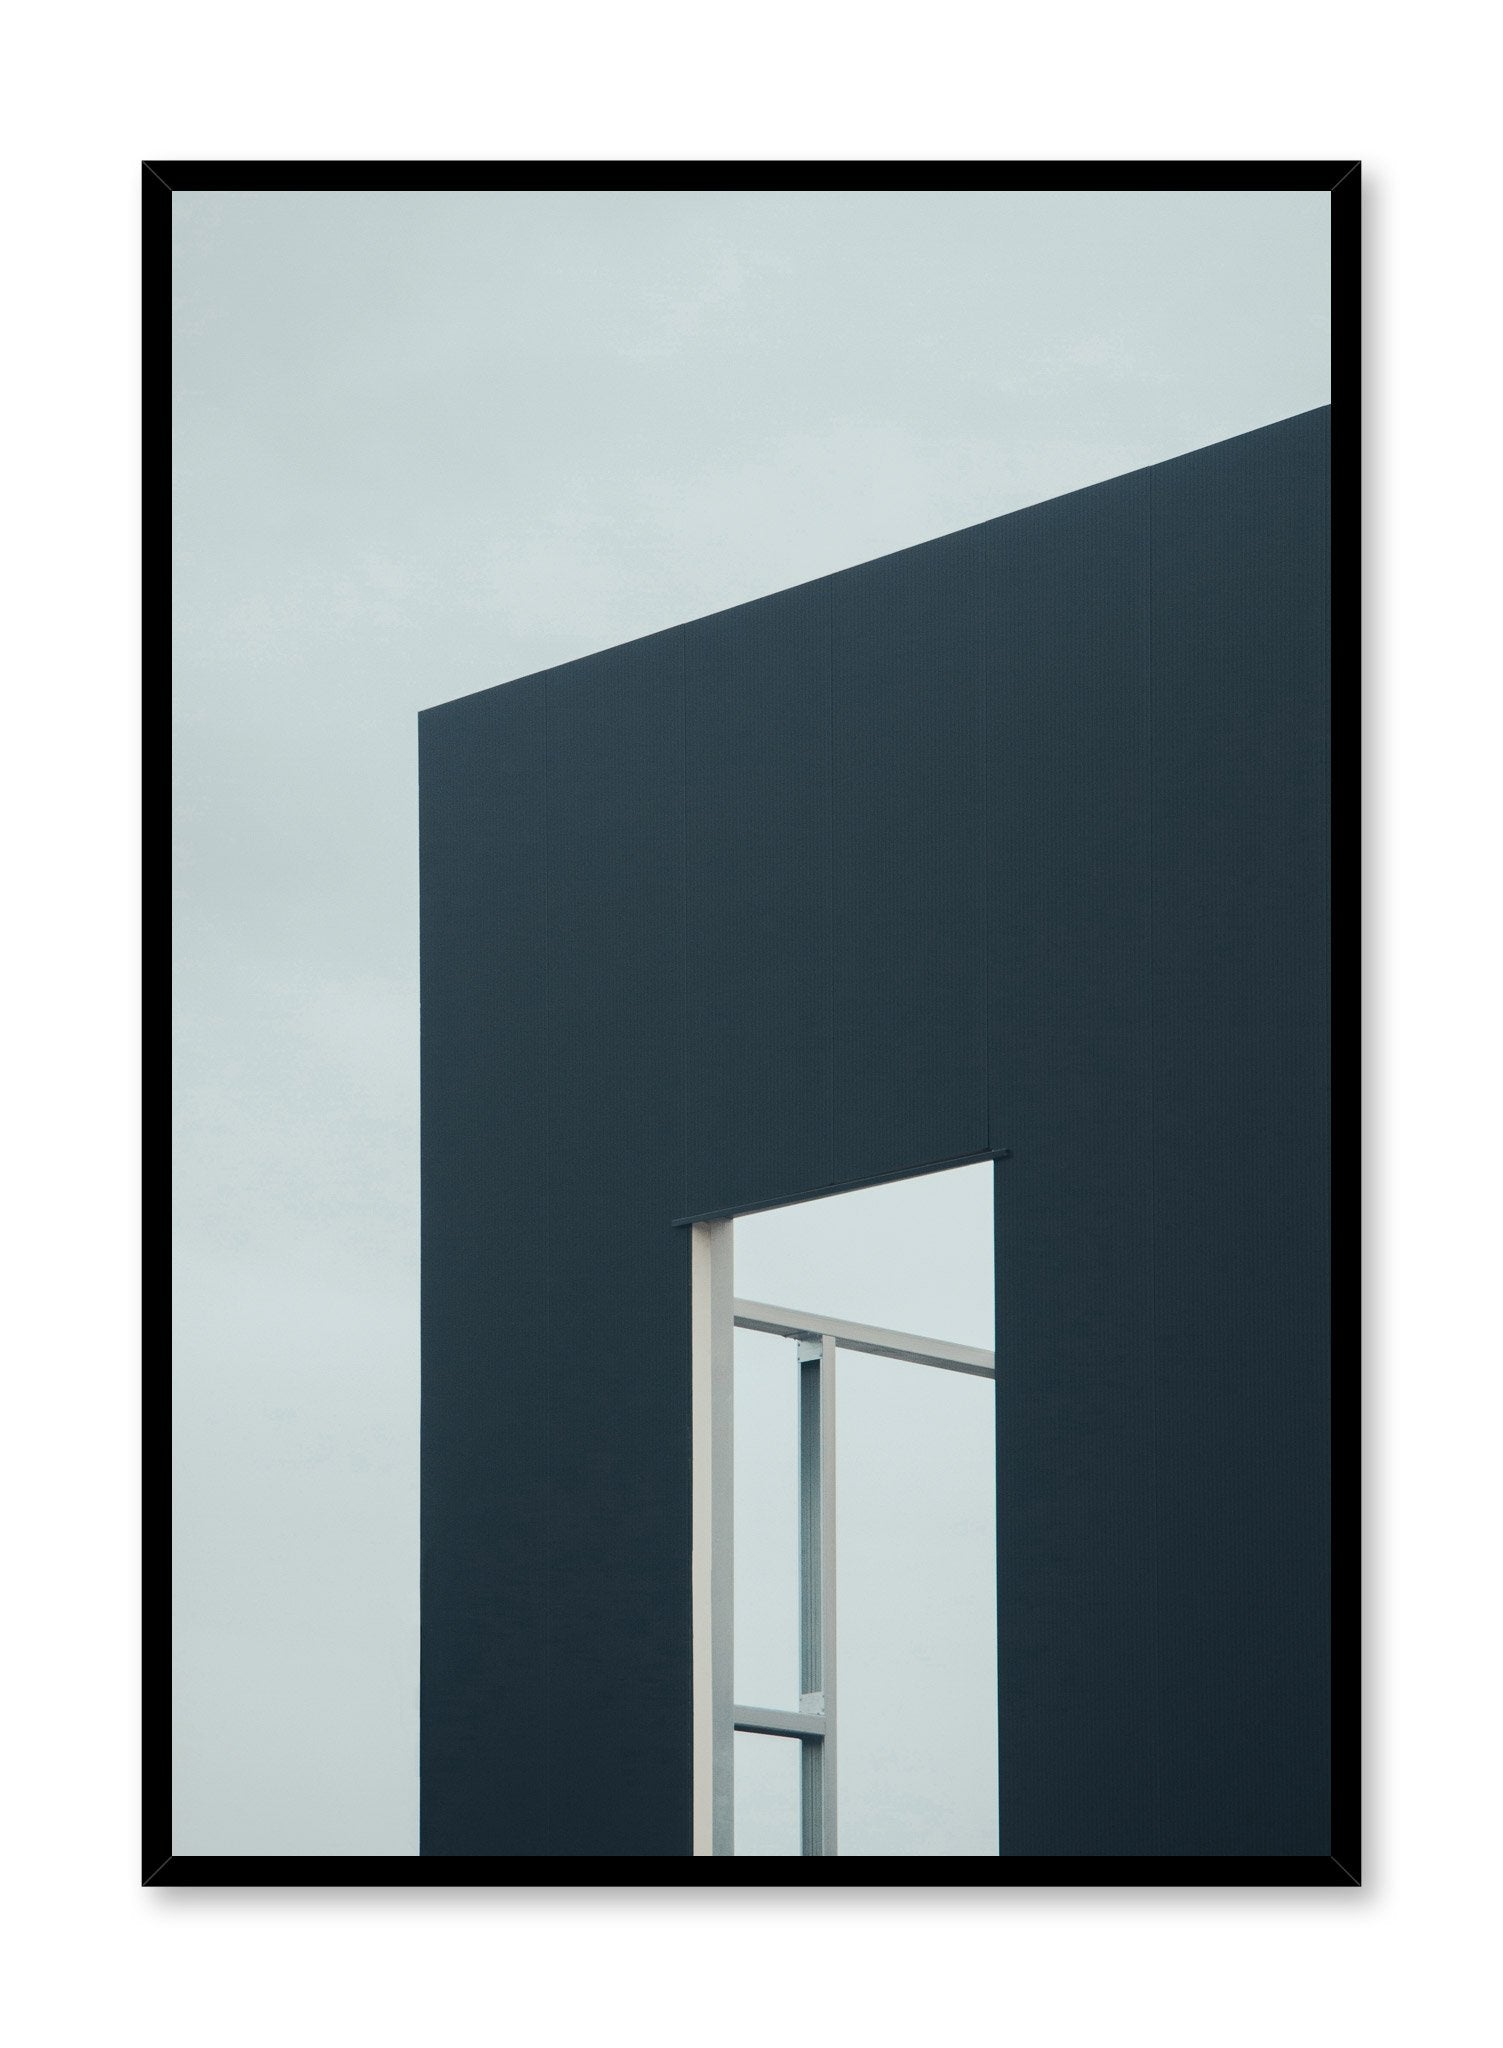 Modern minimalist poster by Opposite Wall with photography of blue building window